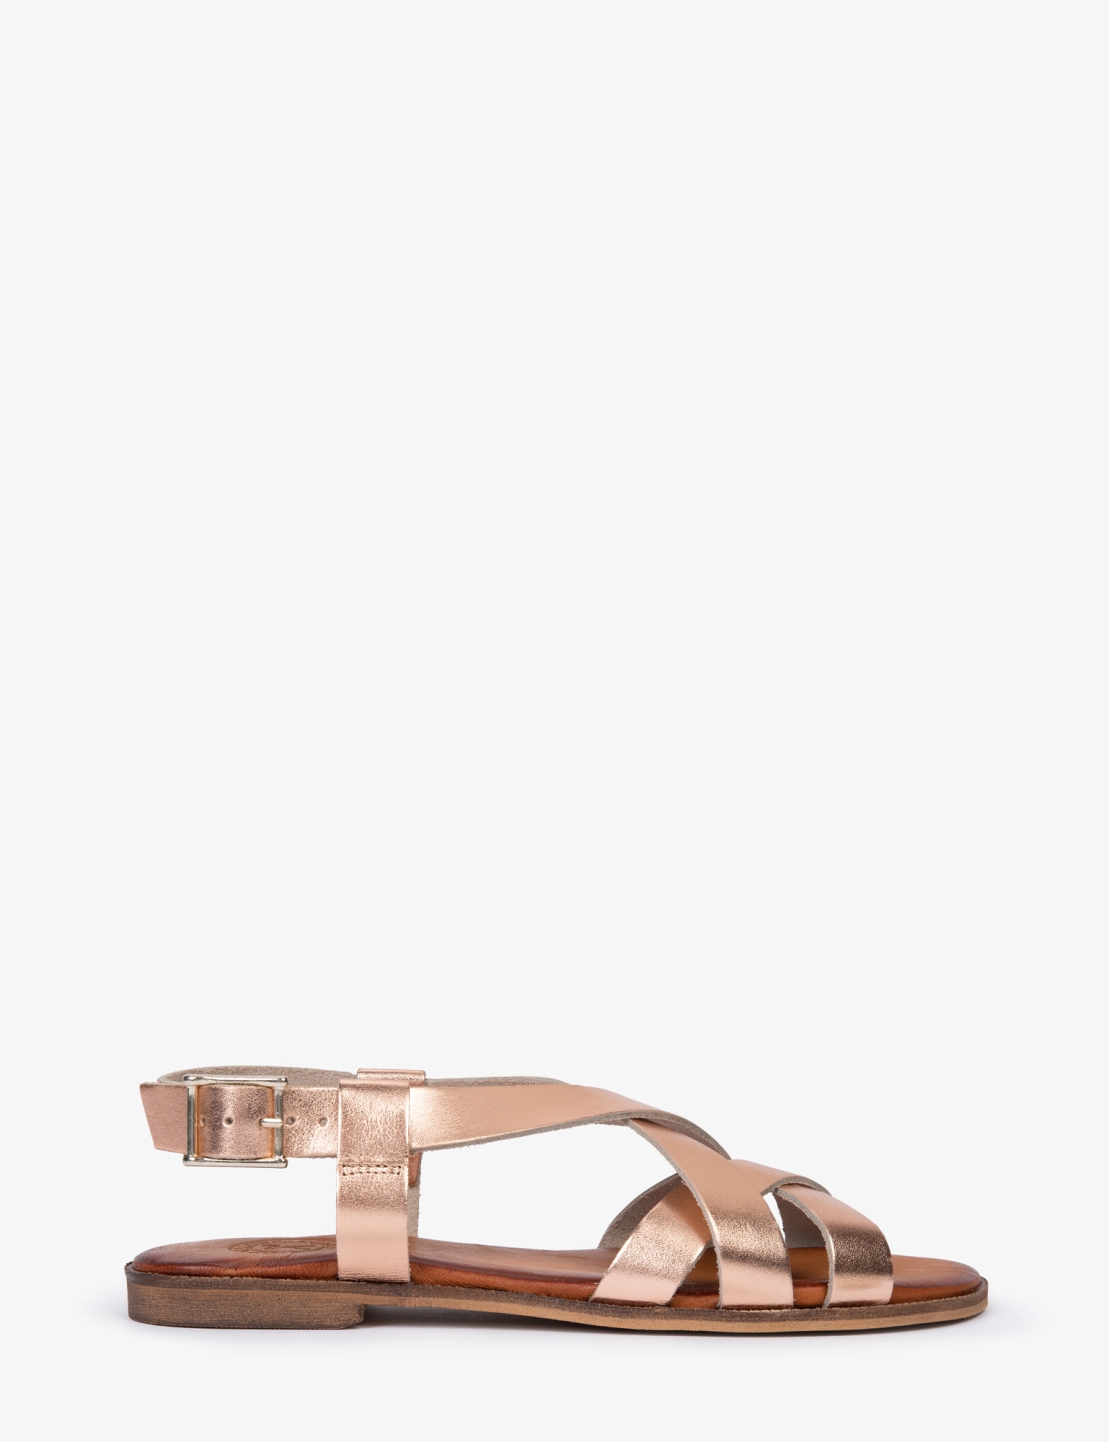 Buttercup Leather Sandal - Rose Gold | Women's Shoes | Penelope Chilvers